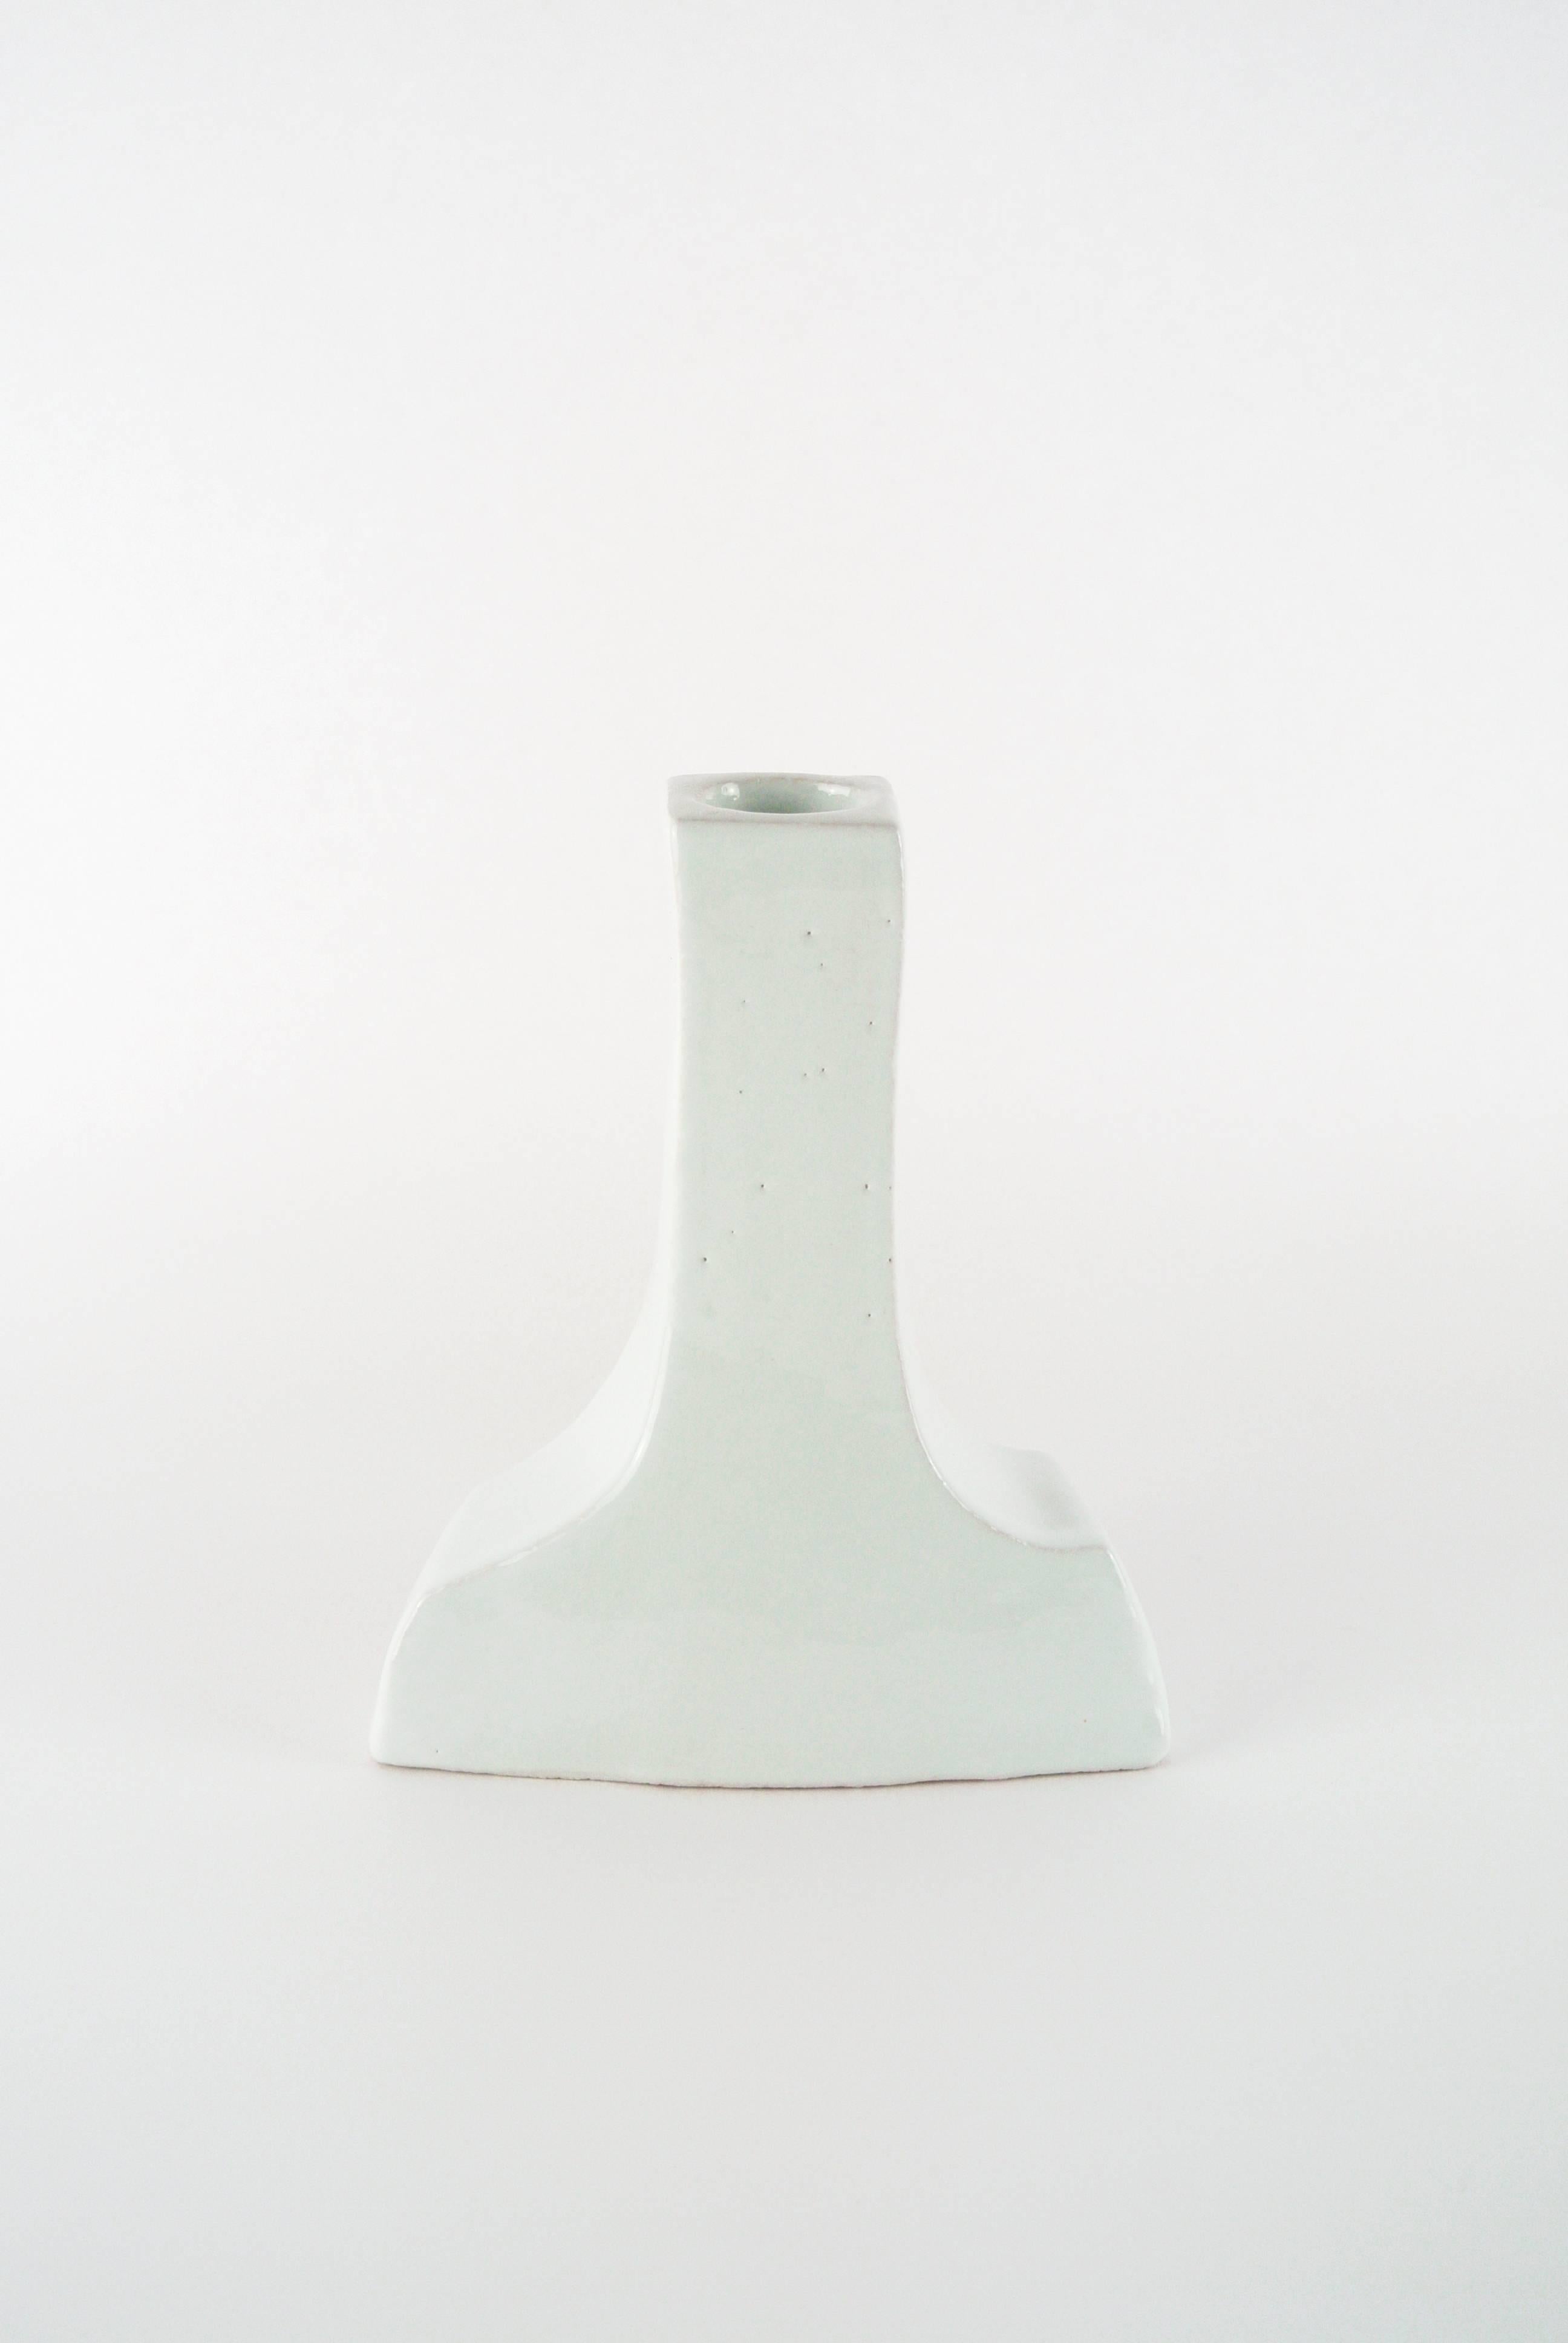 Organic Modern Contemporary Porcelain Candleholder with White Glossy Glaze